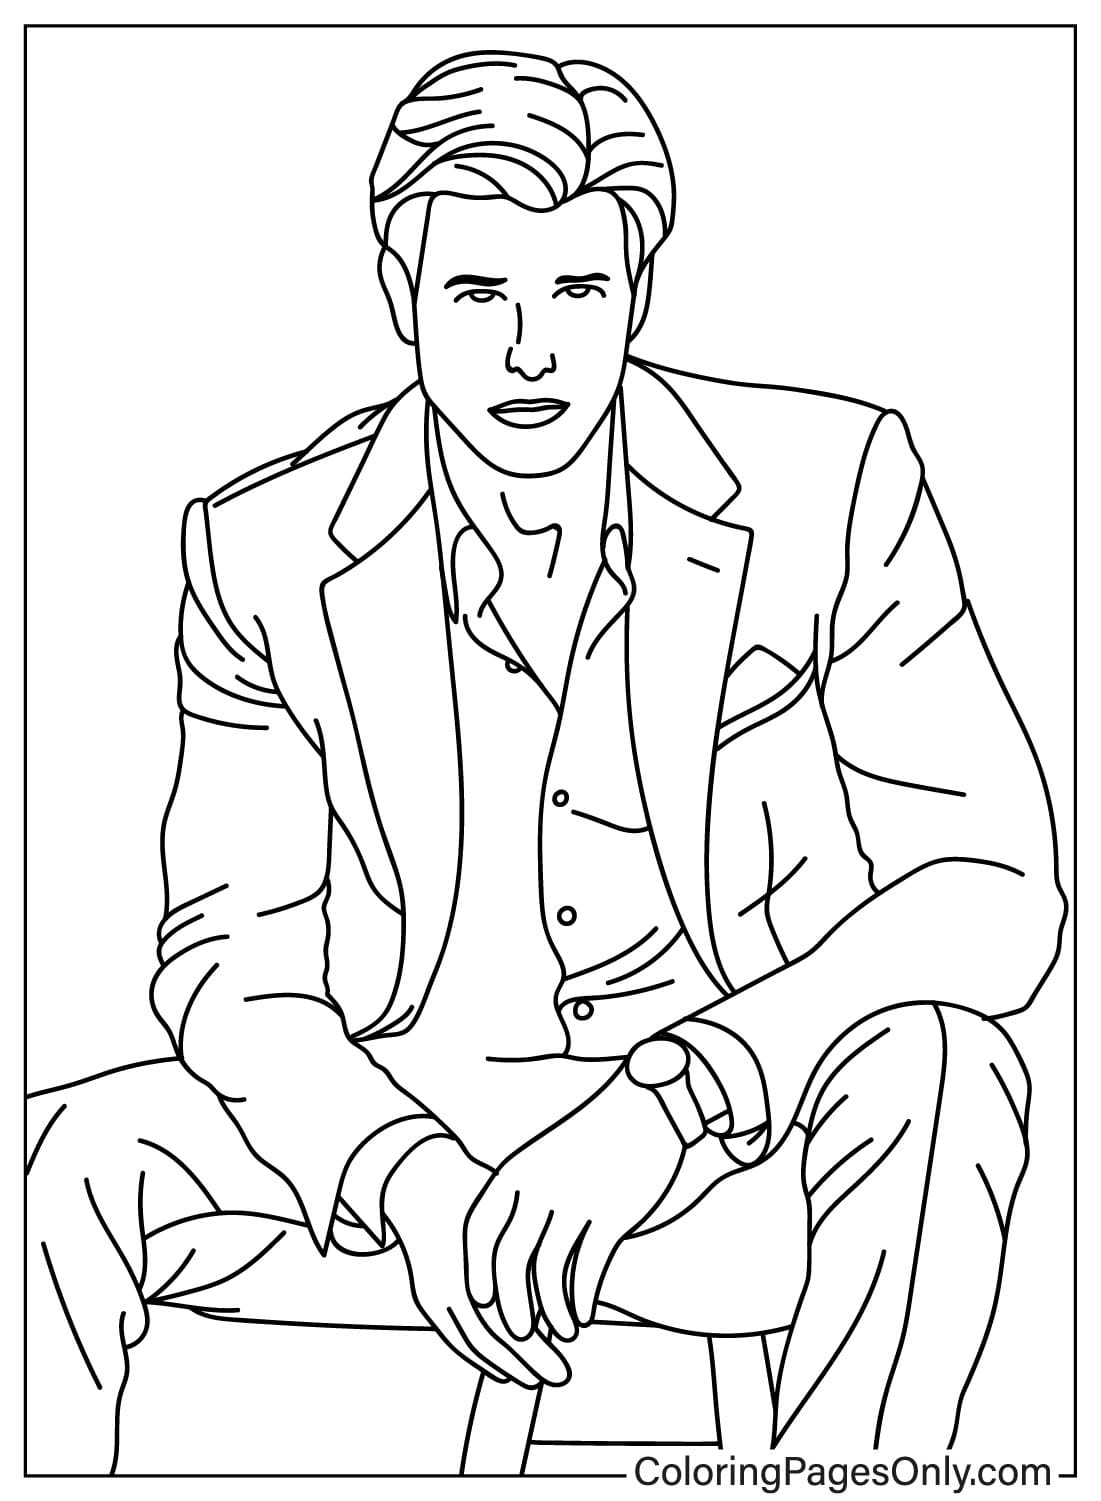 Free Tom Cruise Coloring Page - Free Printable Coloring Pages